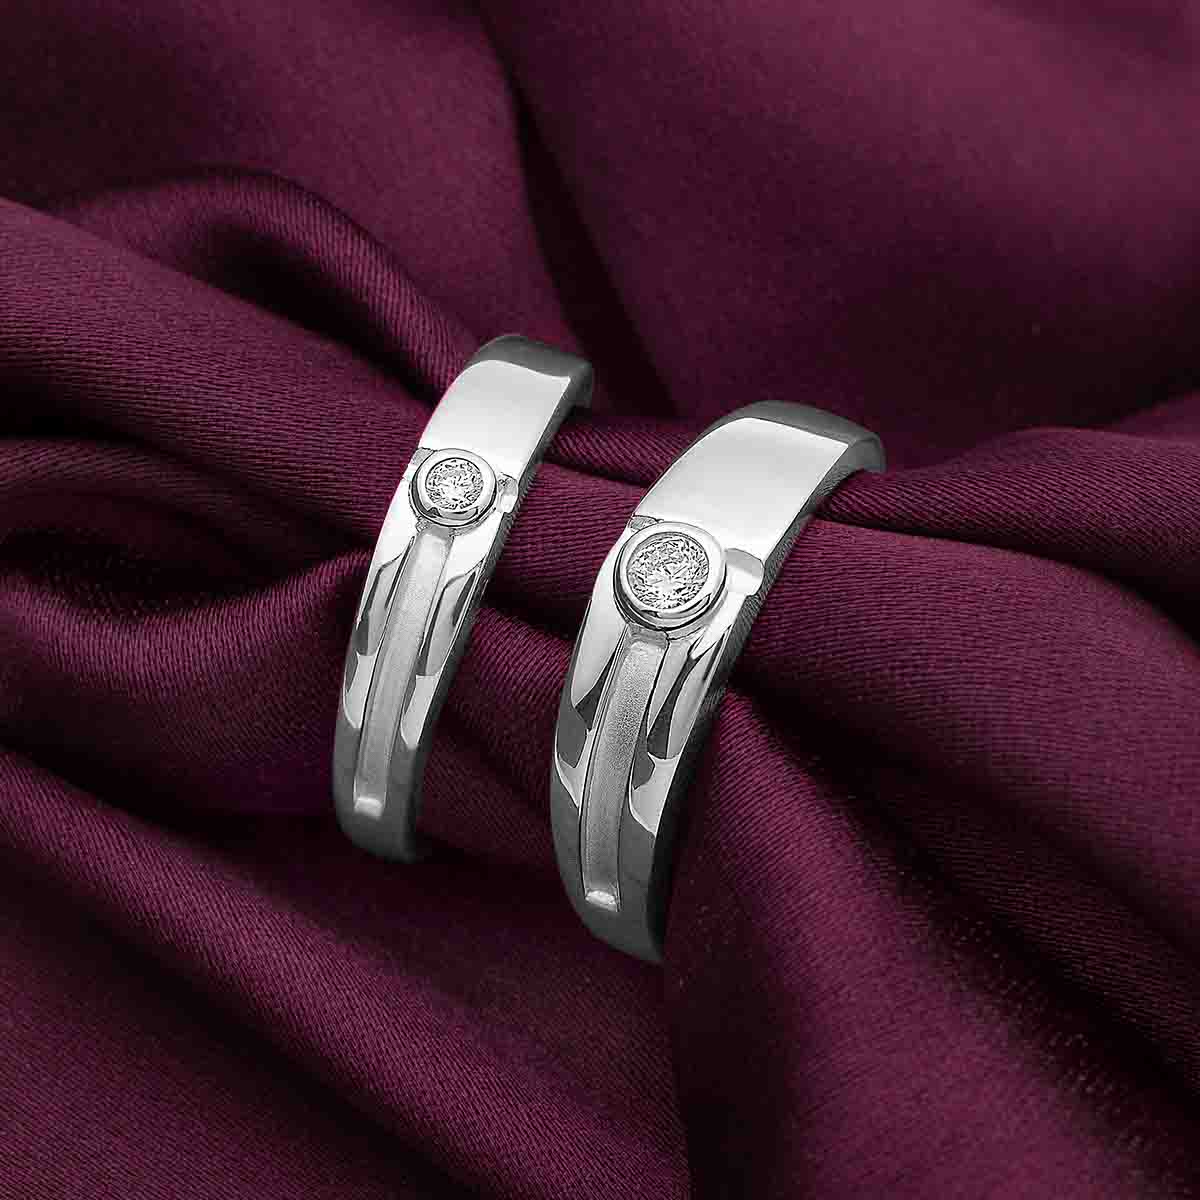 Adjustable Elk Promise Ring For Couples In Sterling Silver